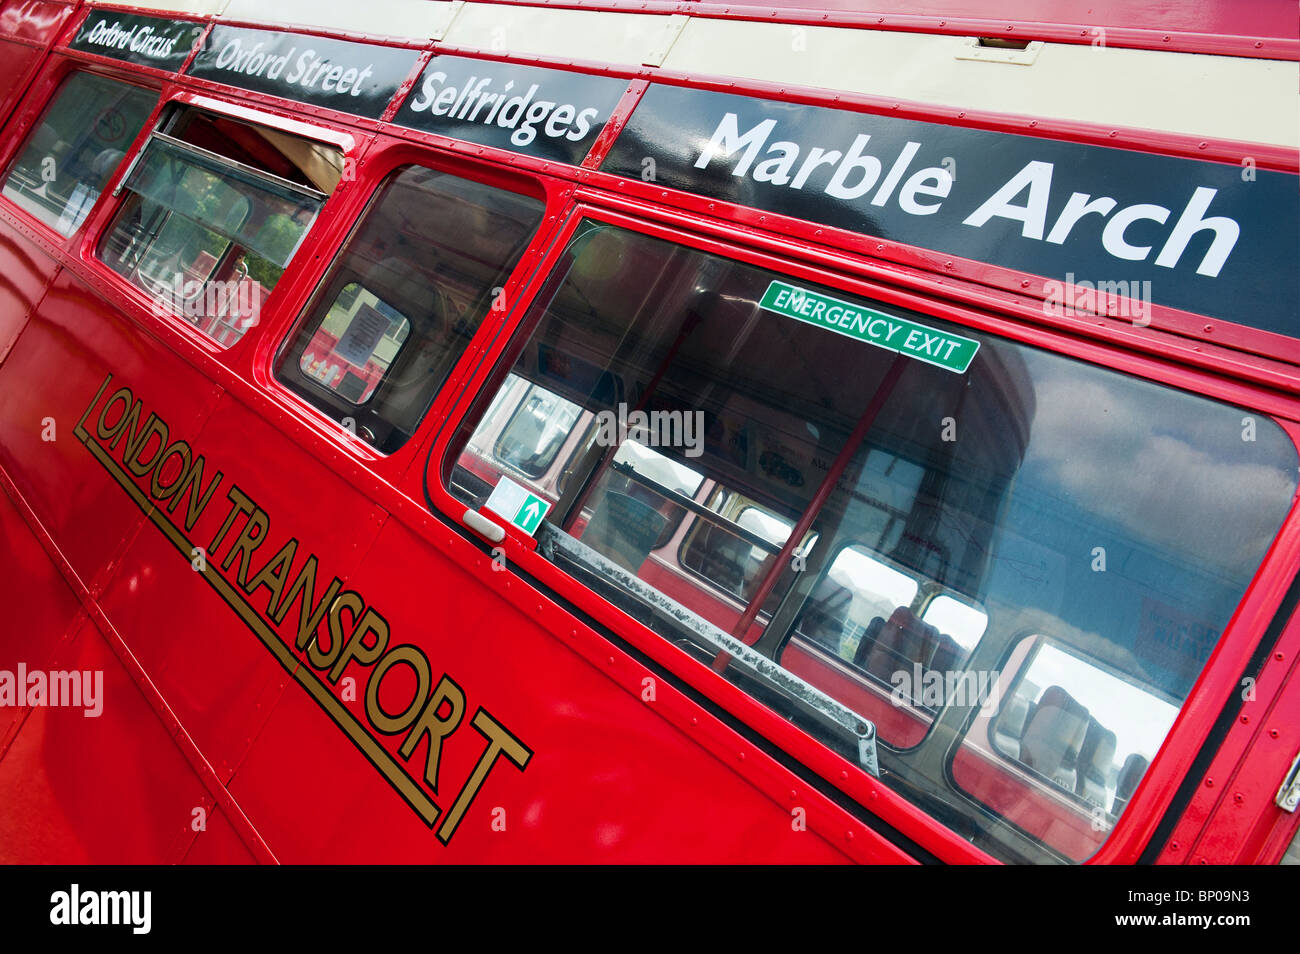 AEC Routemaster, London double decker red bus. RCL class Stock Photo